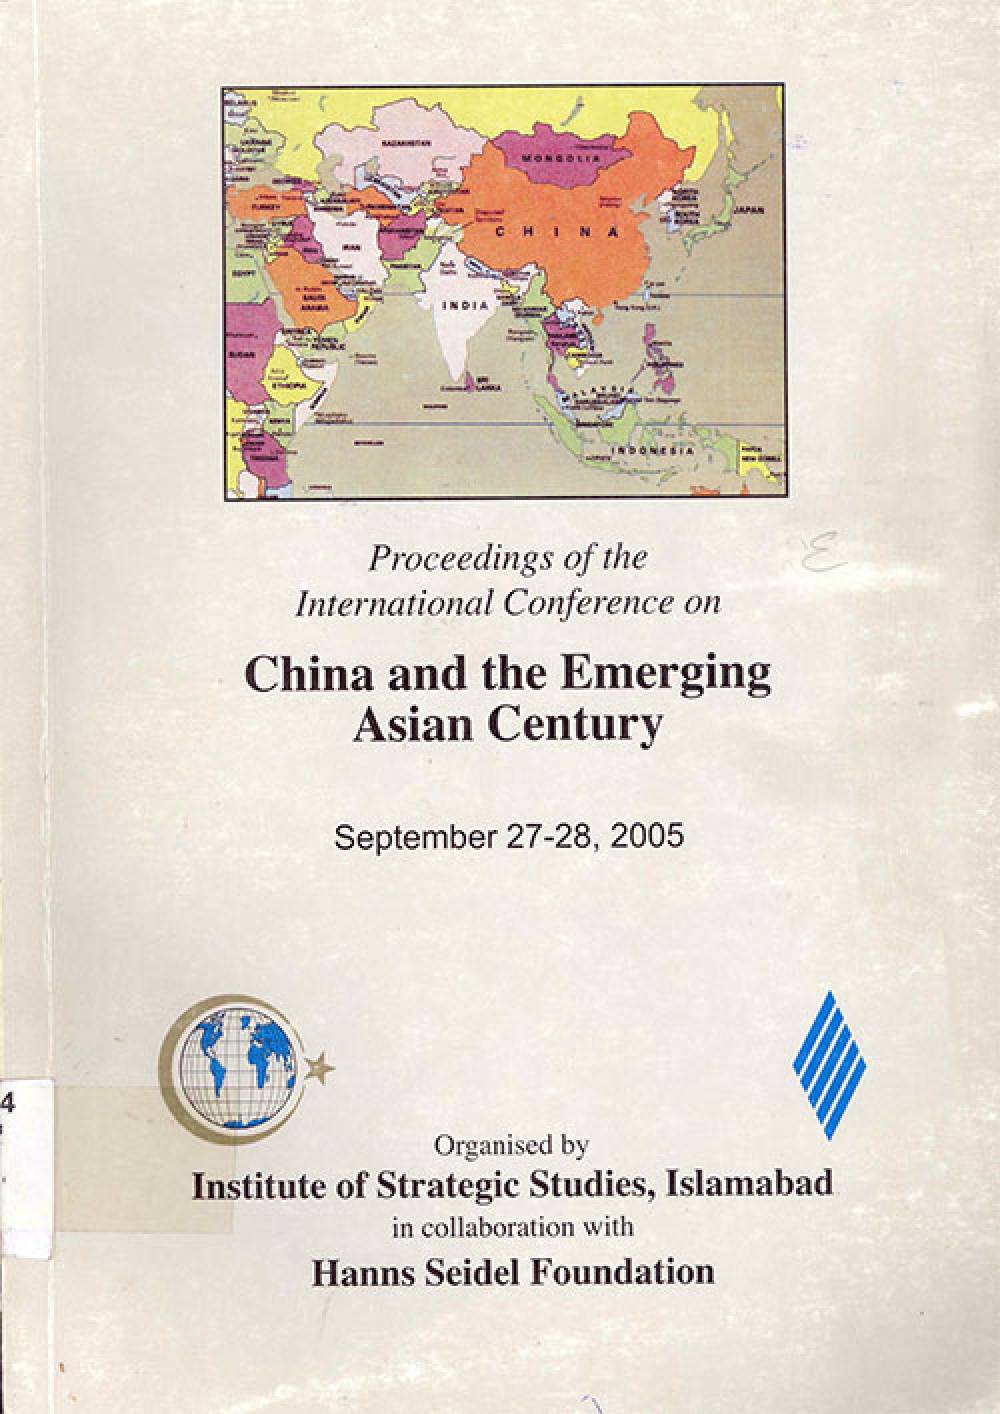 China and the Emerging Asian Century 2005